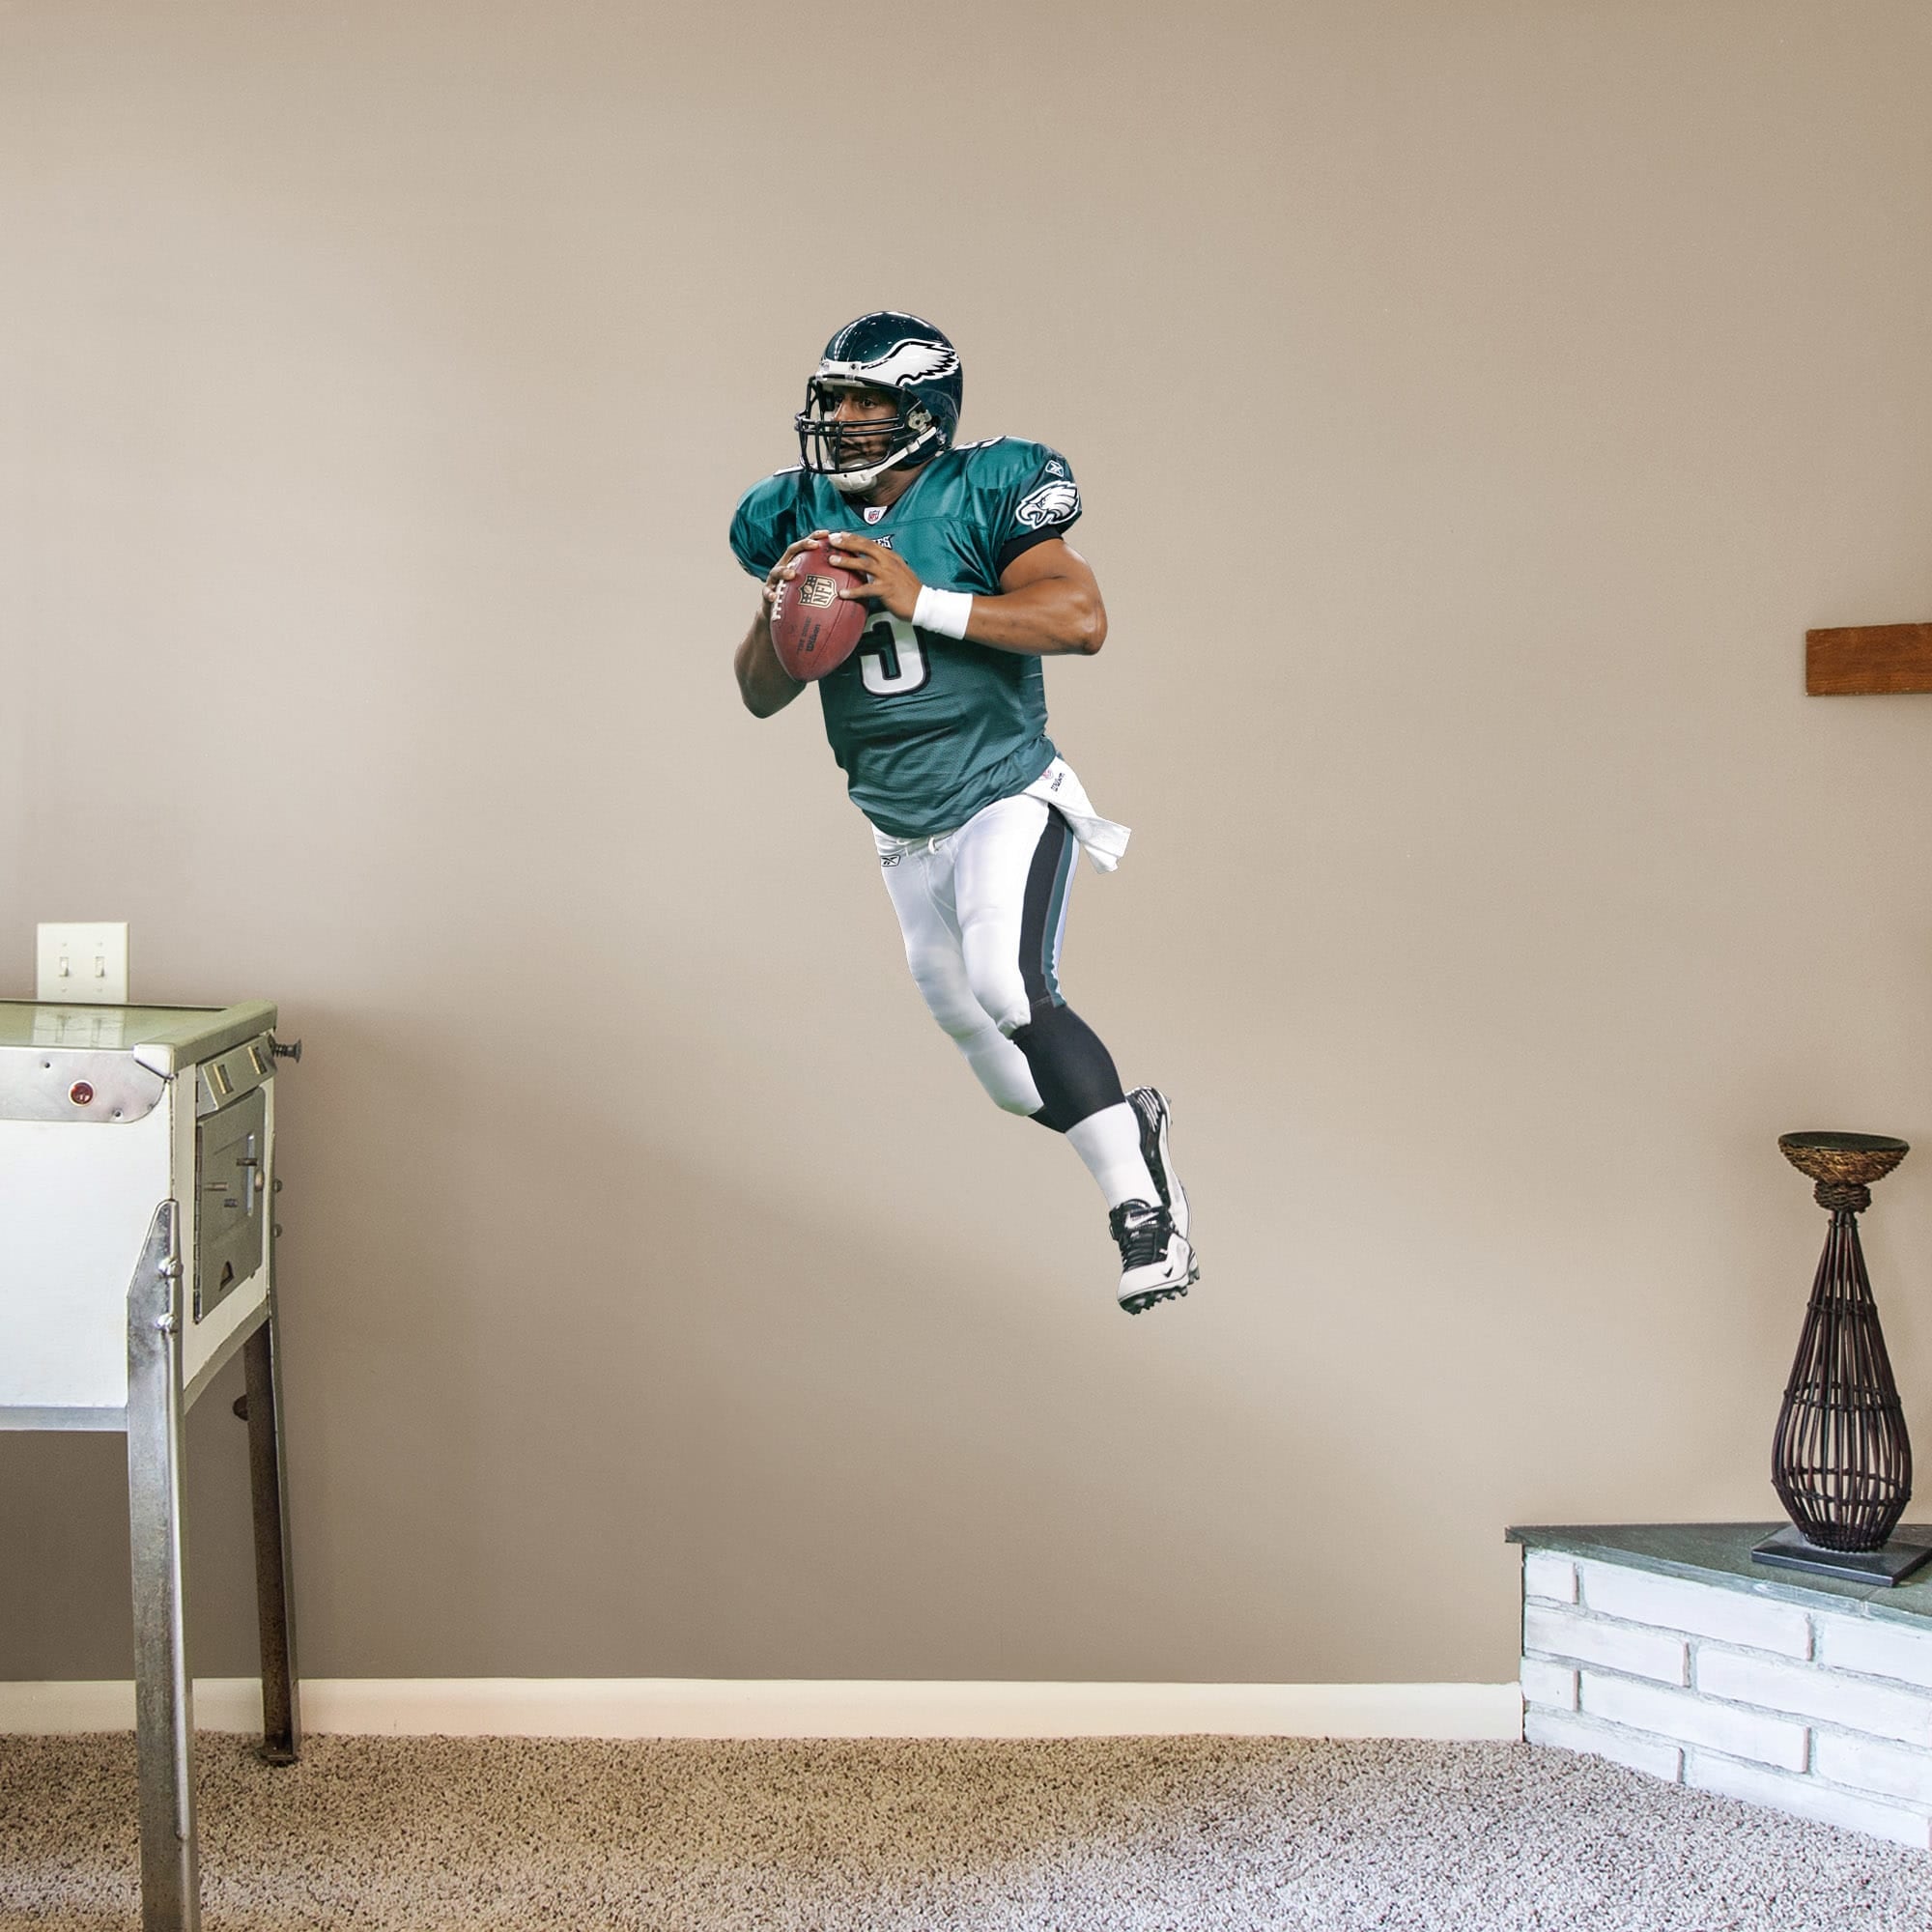 Donovan McNabb for Philadelphia Eagles: Legend - Officially Licensed NFL Removable Wall Decal Giant Athlete + 2 Decals (24"W x 5